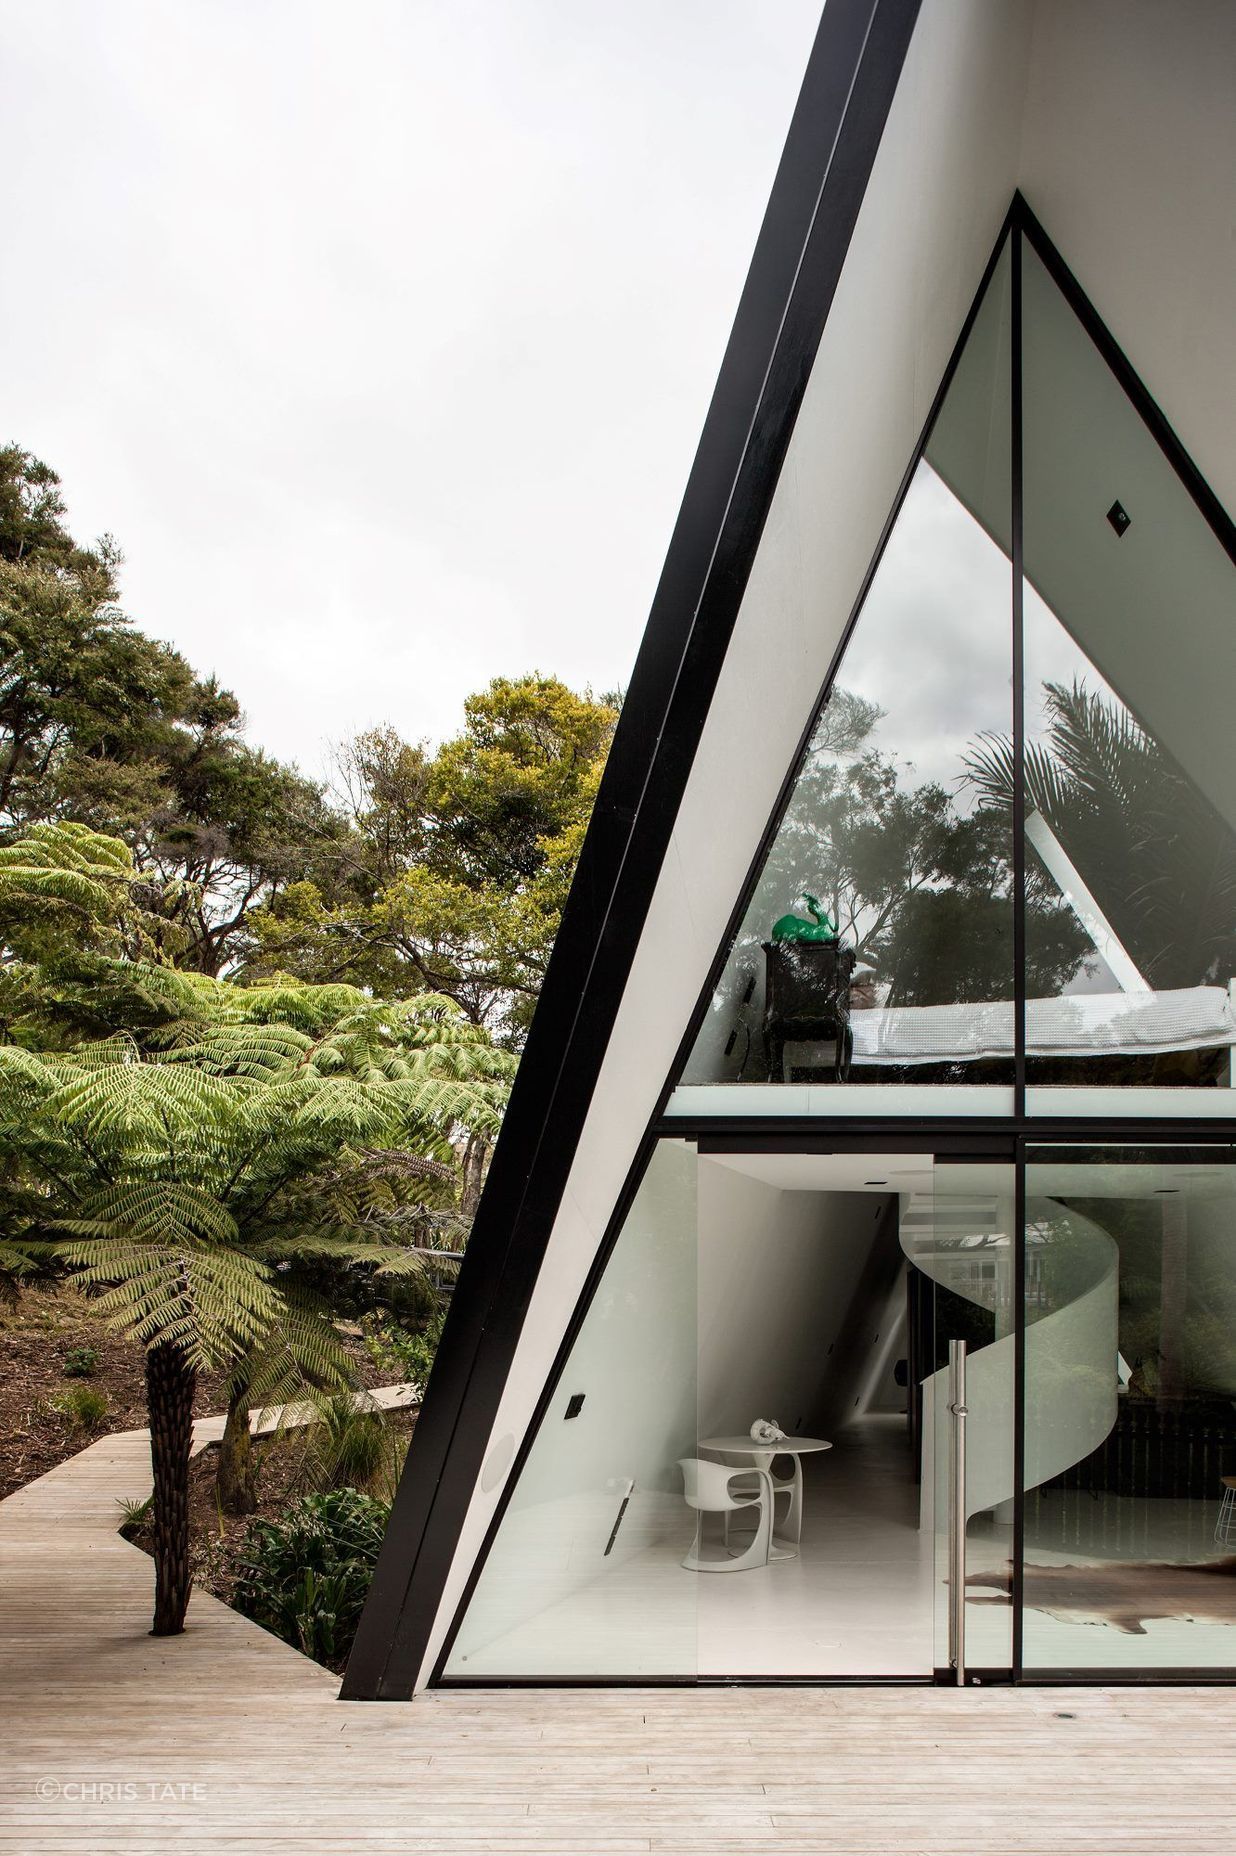 The exquisite Tent House and its minimalist interior styling. | Photography: Simon Devitt